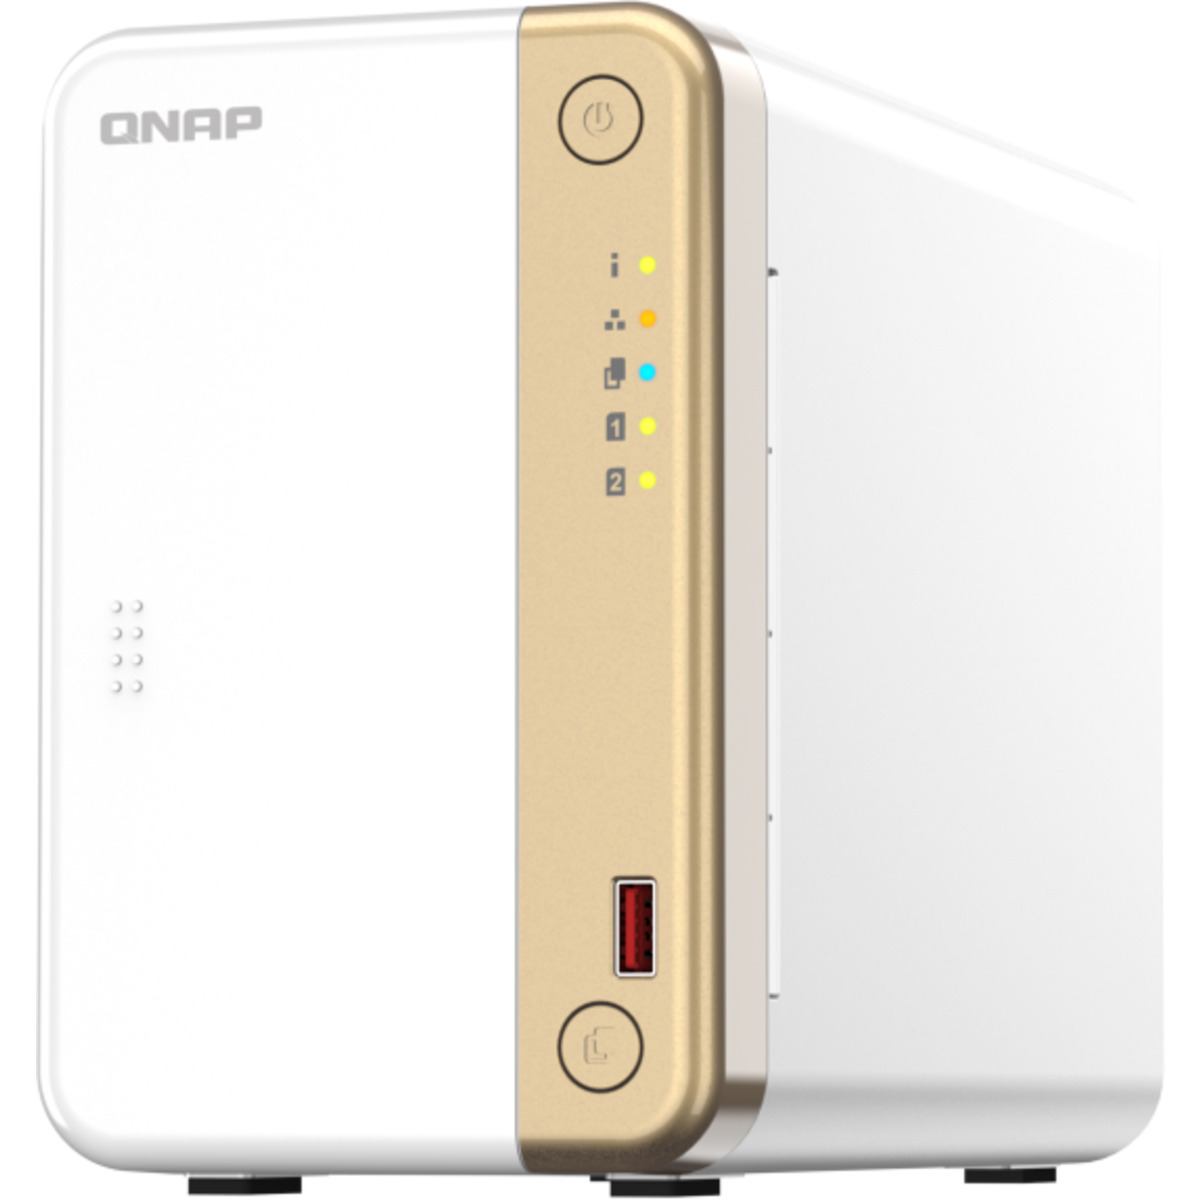 QNAP TS-262 20tb 2-Bay Desktop Personal / Basic Home / Small Office NAS - Network Attached Storage Device 2x10tb Seagate IronWolf Pro ST10000NT001 3.5 7200rpm SATA 6Gb/s HDD NAS Class Drives Installed - Burn-In Tested - ON SALE TS-262